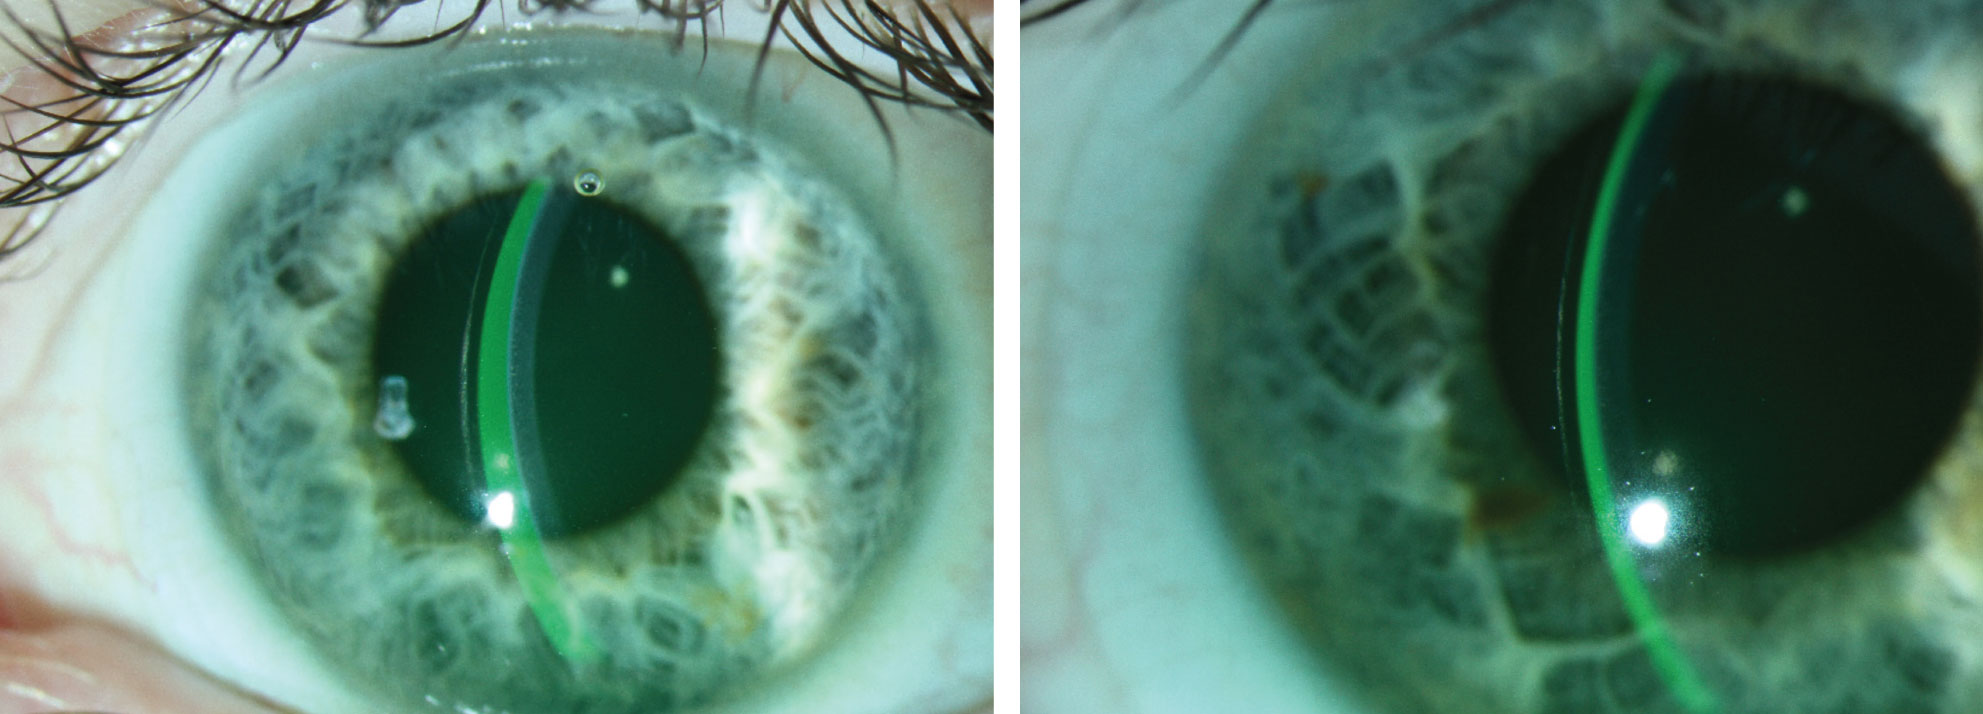 At right, the tear film and lens thickness are almost equal. The lens on the left shows excessive clearance, which could lead to decreased vision, post-lens debris and conjunctival impingement.